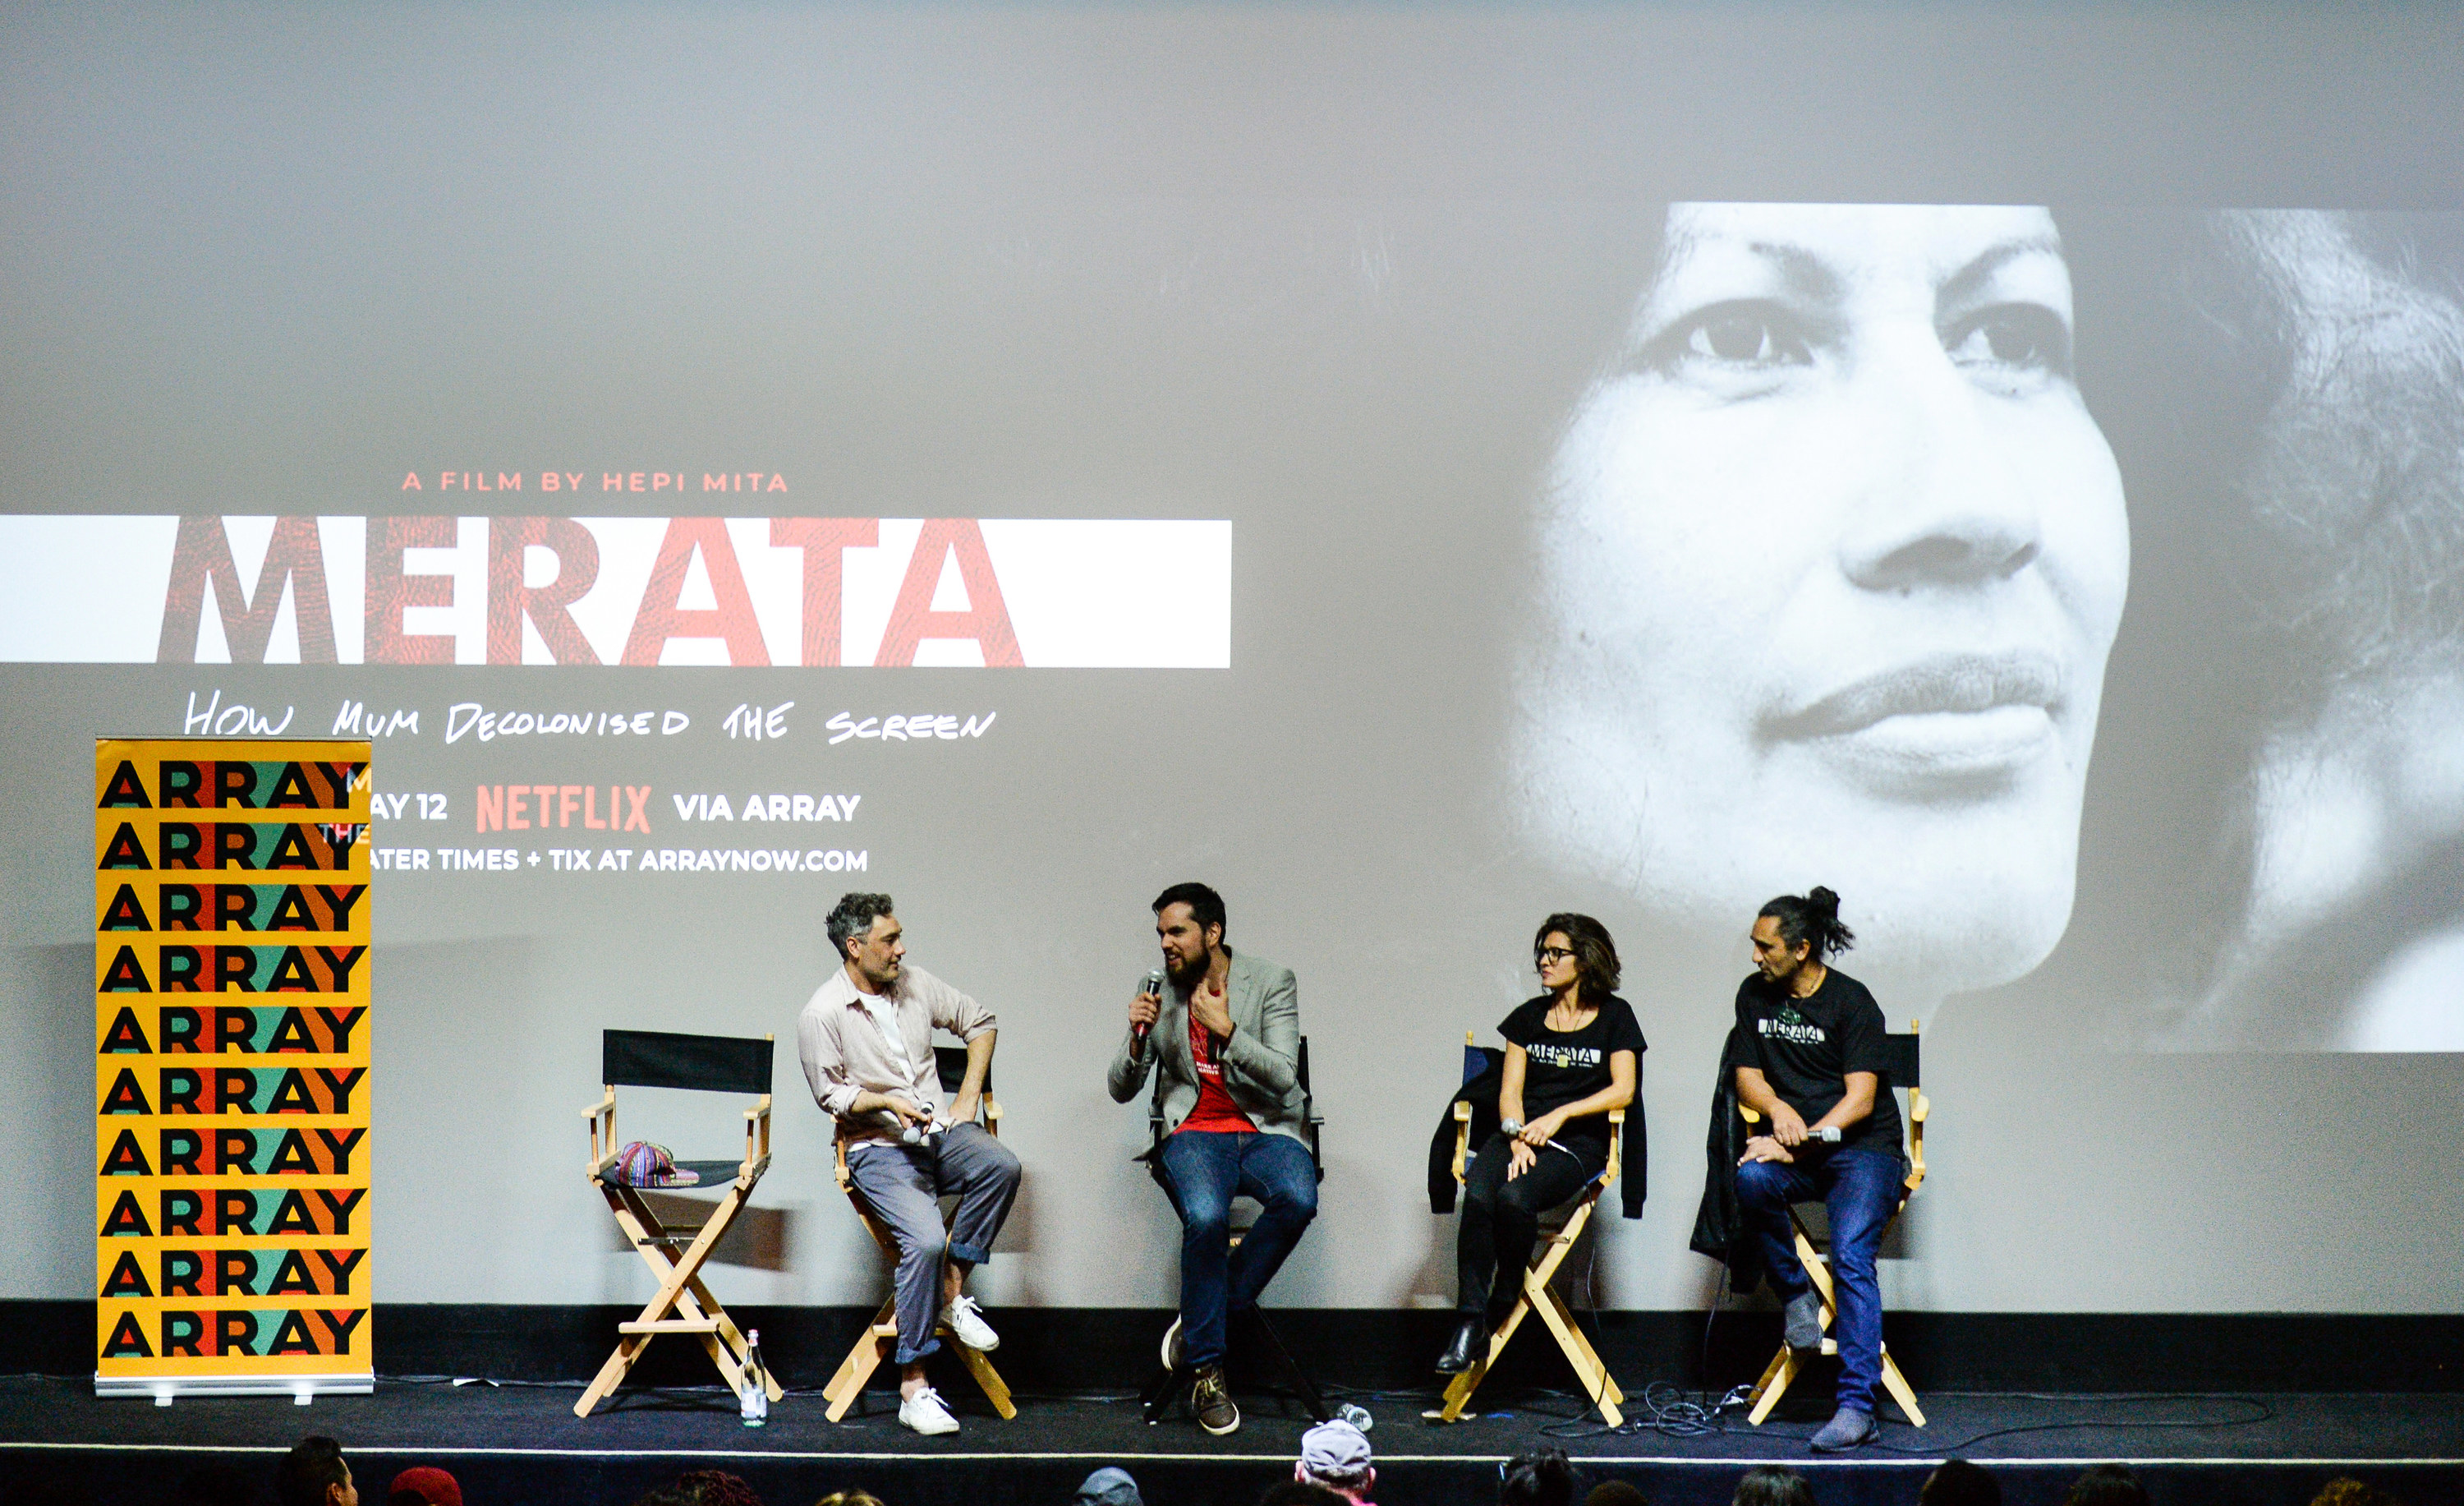 Film directors Taika Waititi, Hepi Mita, film producers Chelsea Winstanley, and Cliff Curtis attend the &quot;MERATA: How Mum Decolonised the Screen&quot; Screening/Q&amp;amp;A at the Ahrya Fine Arts Movie Theater